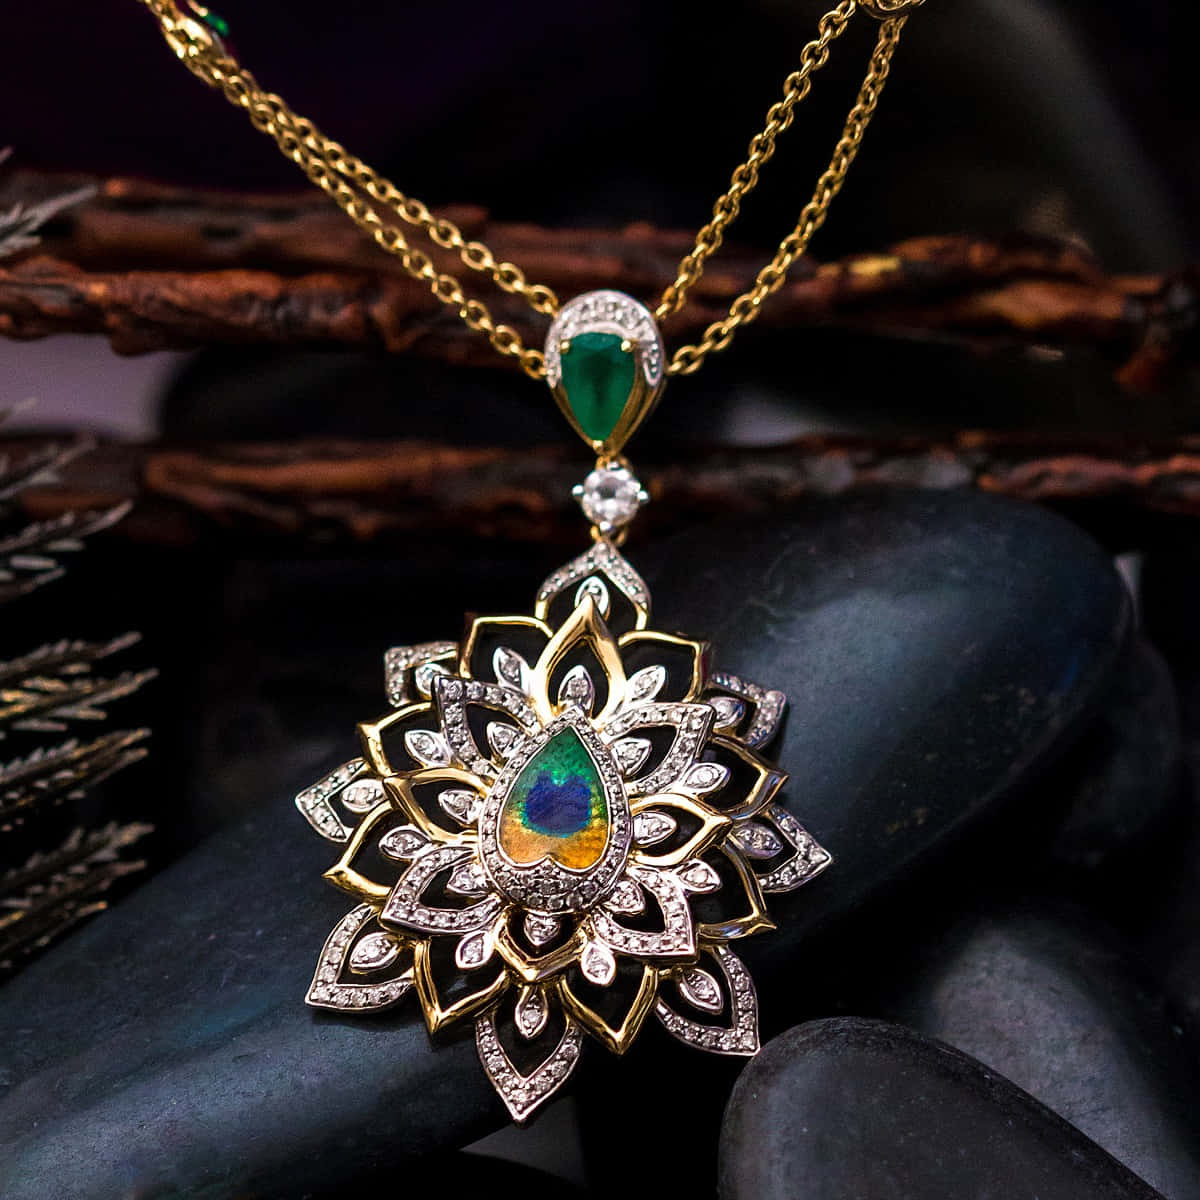 A Pendant With A Green Opal And Diamonds